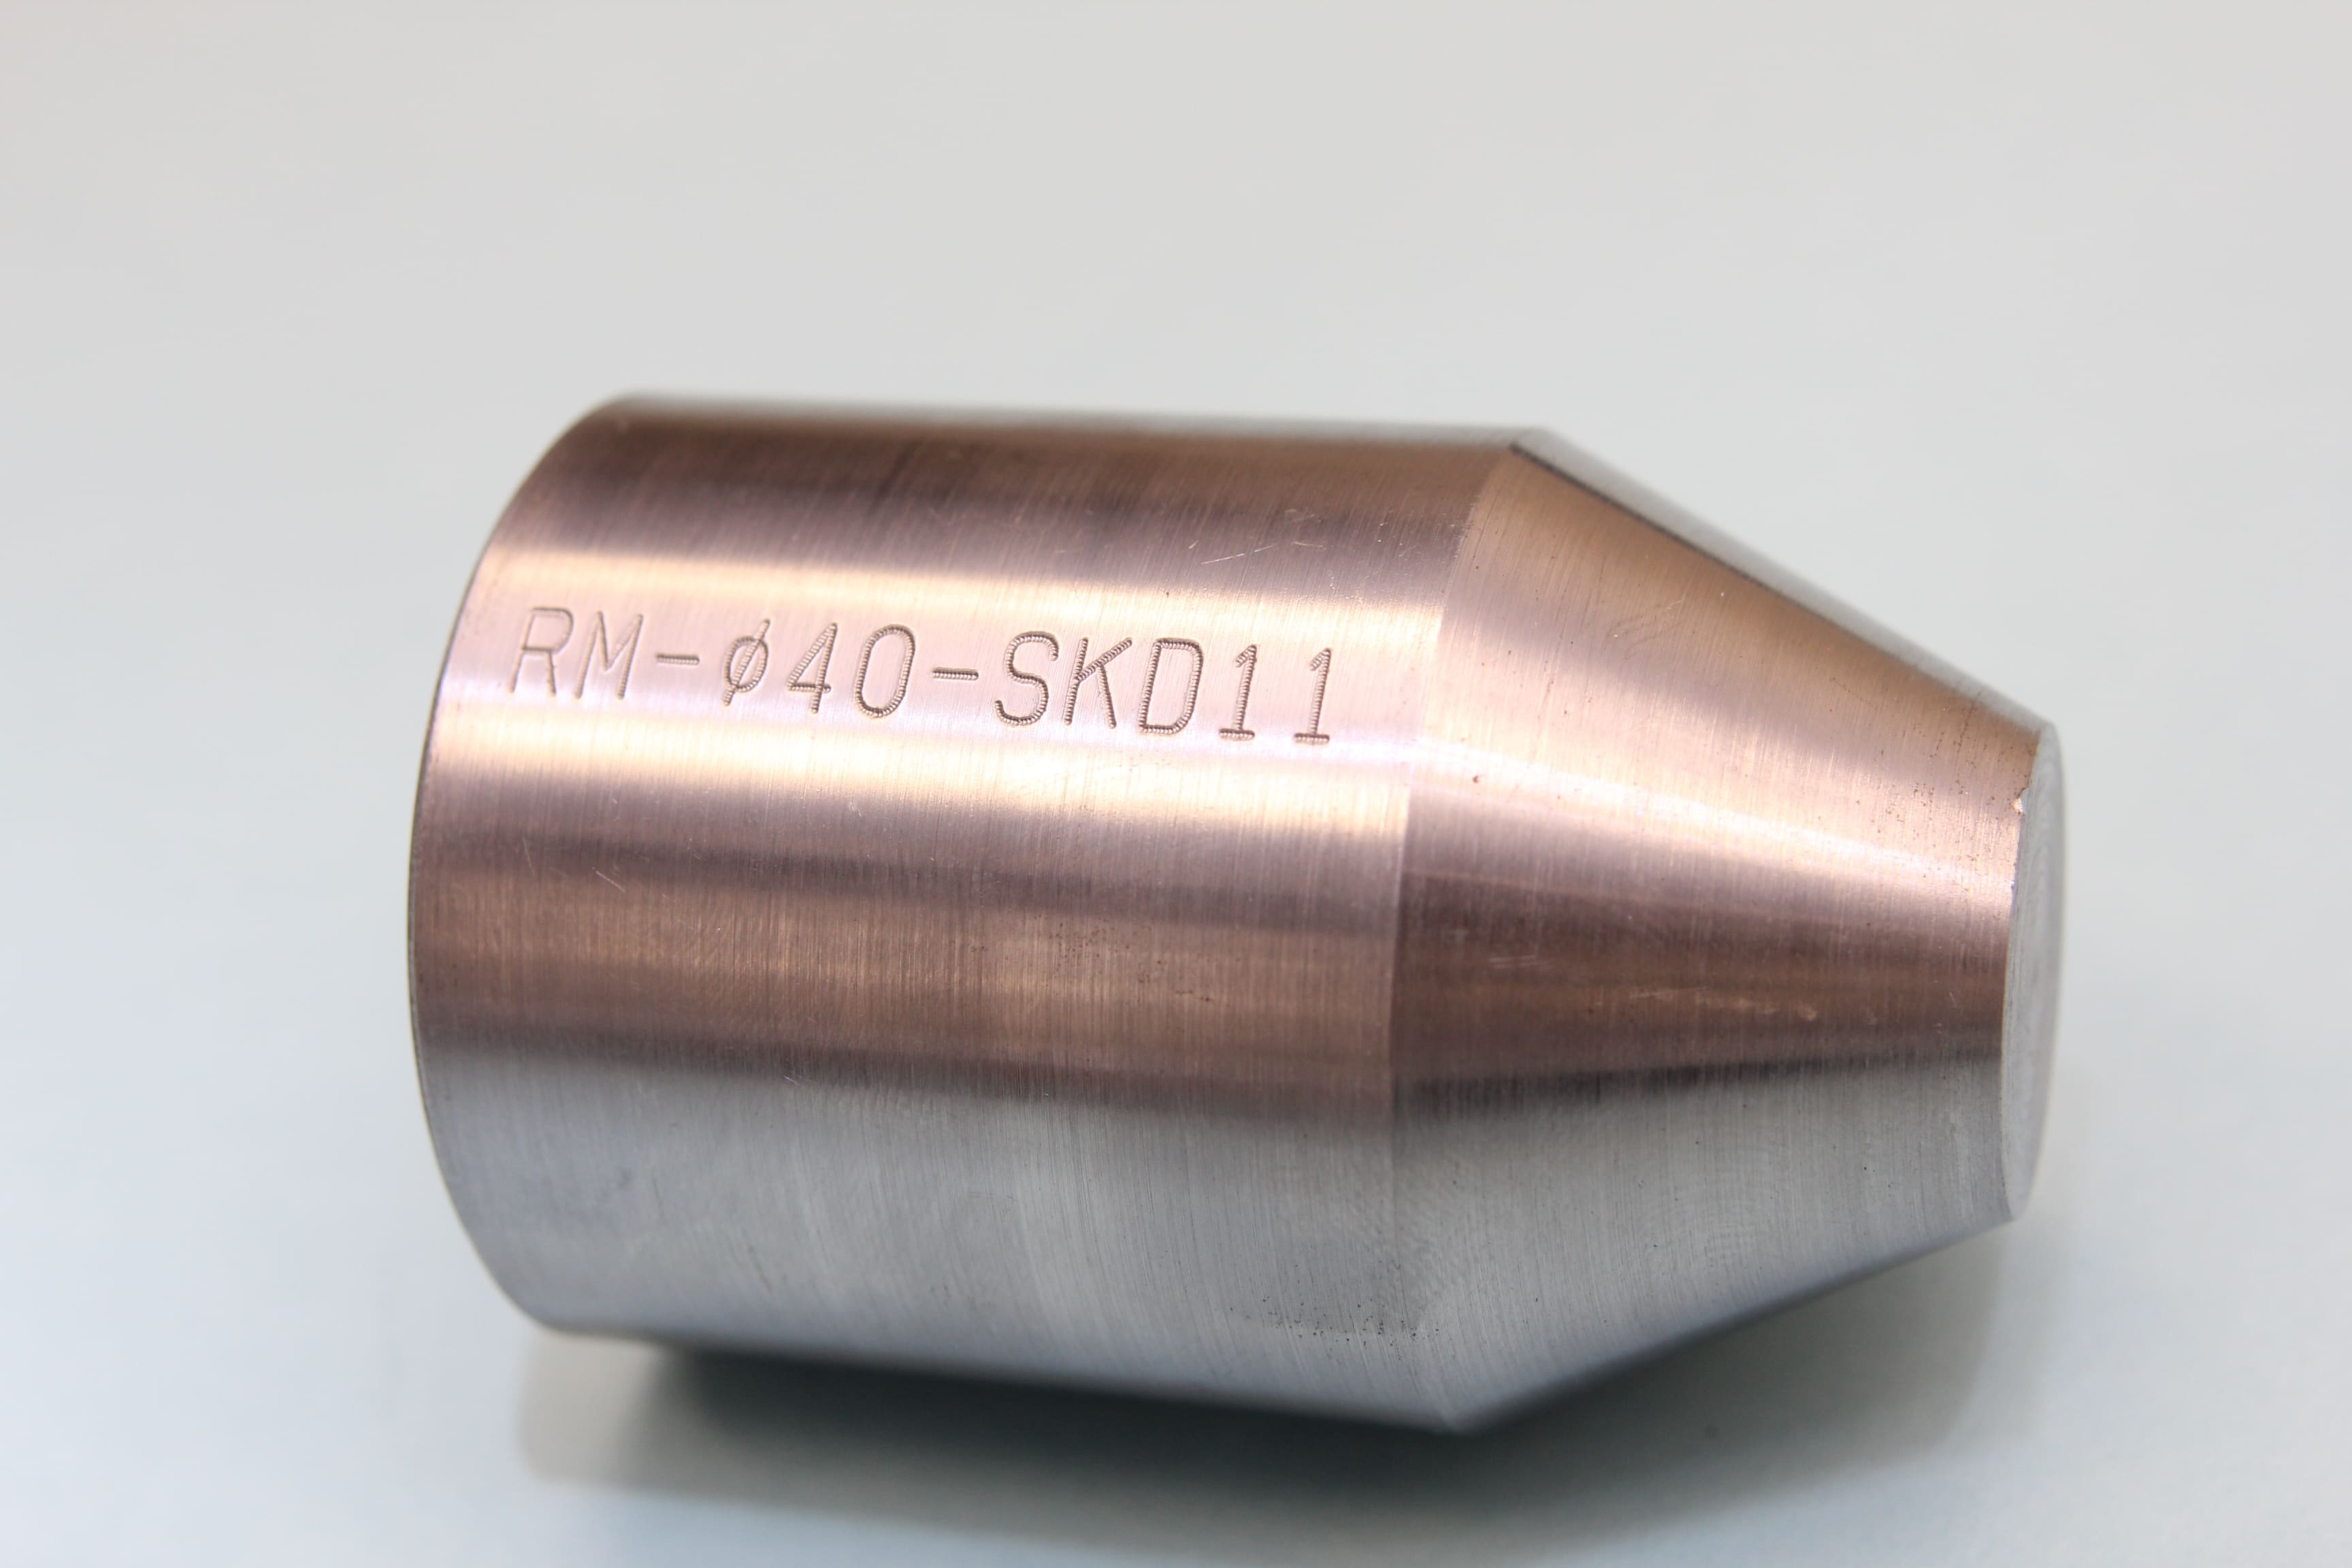 Image of round parts engraved with text and numbers 'RM-Ø40-SKD11'.